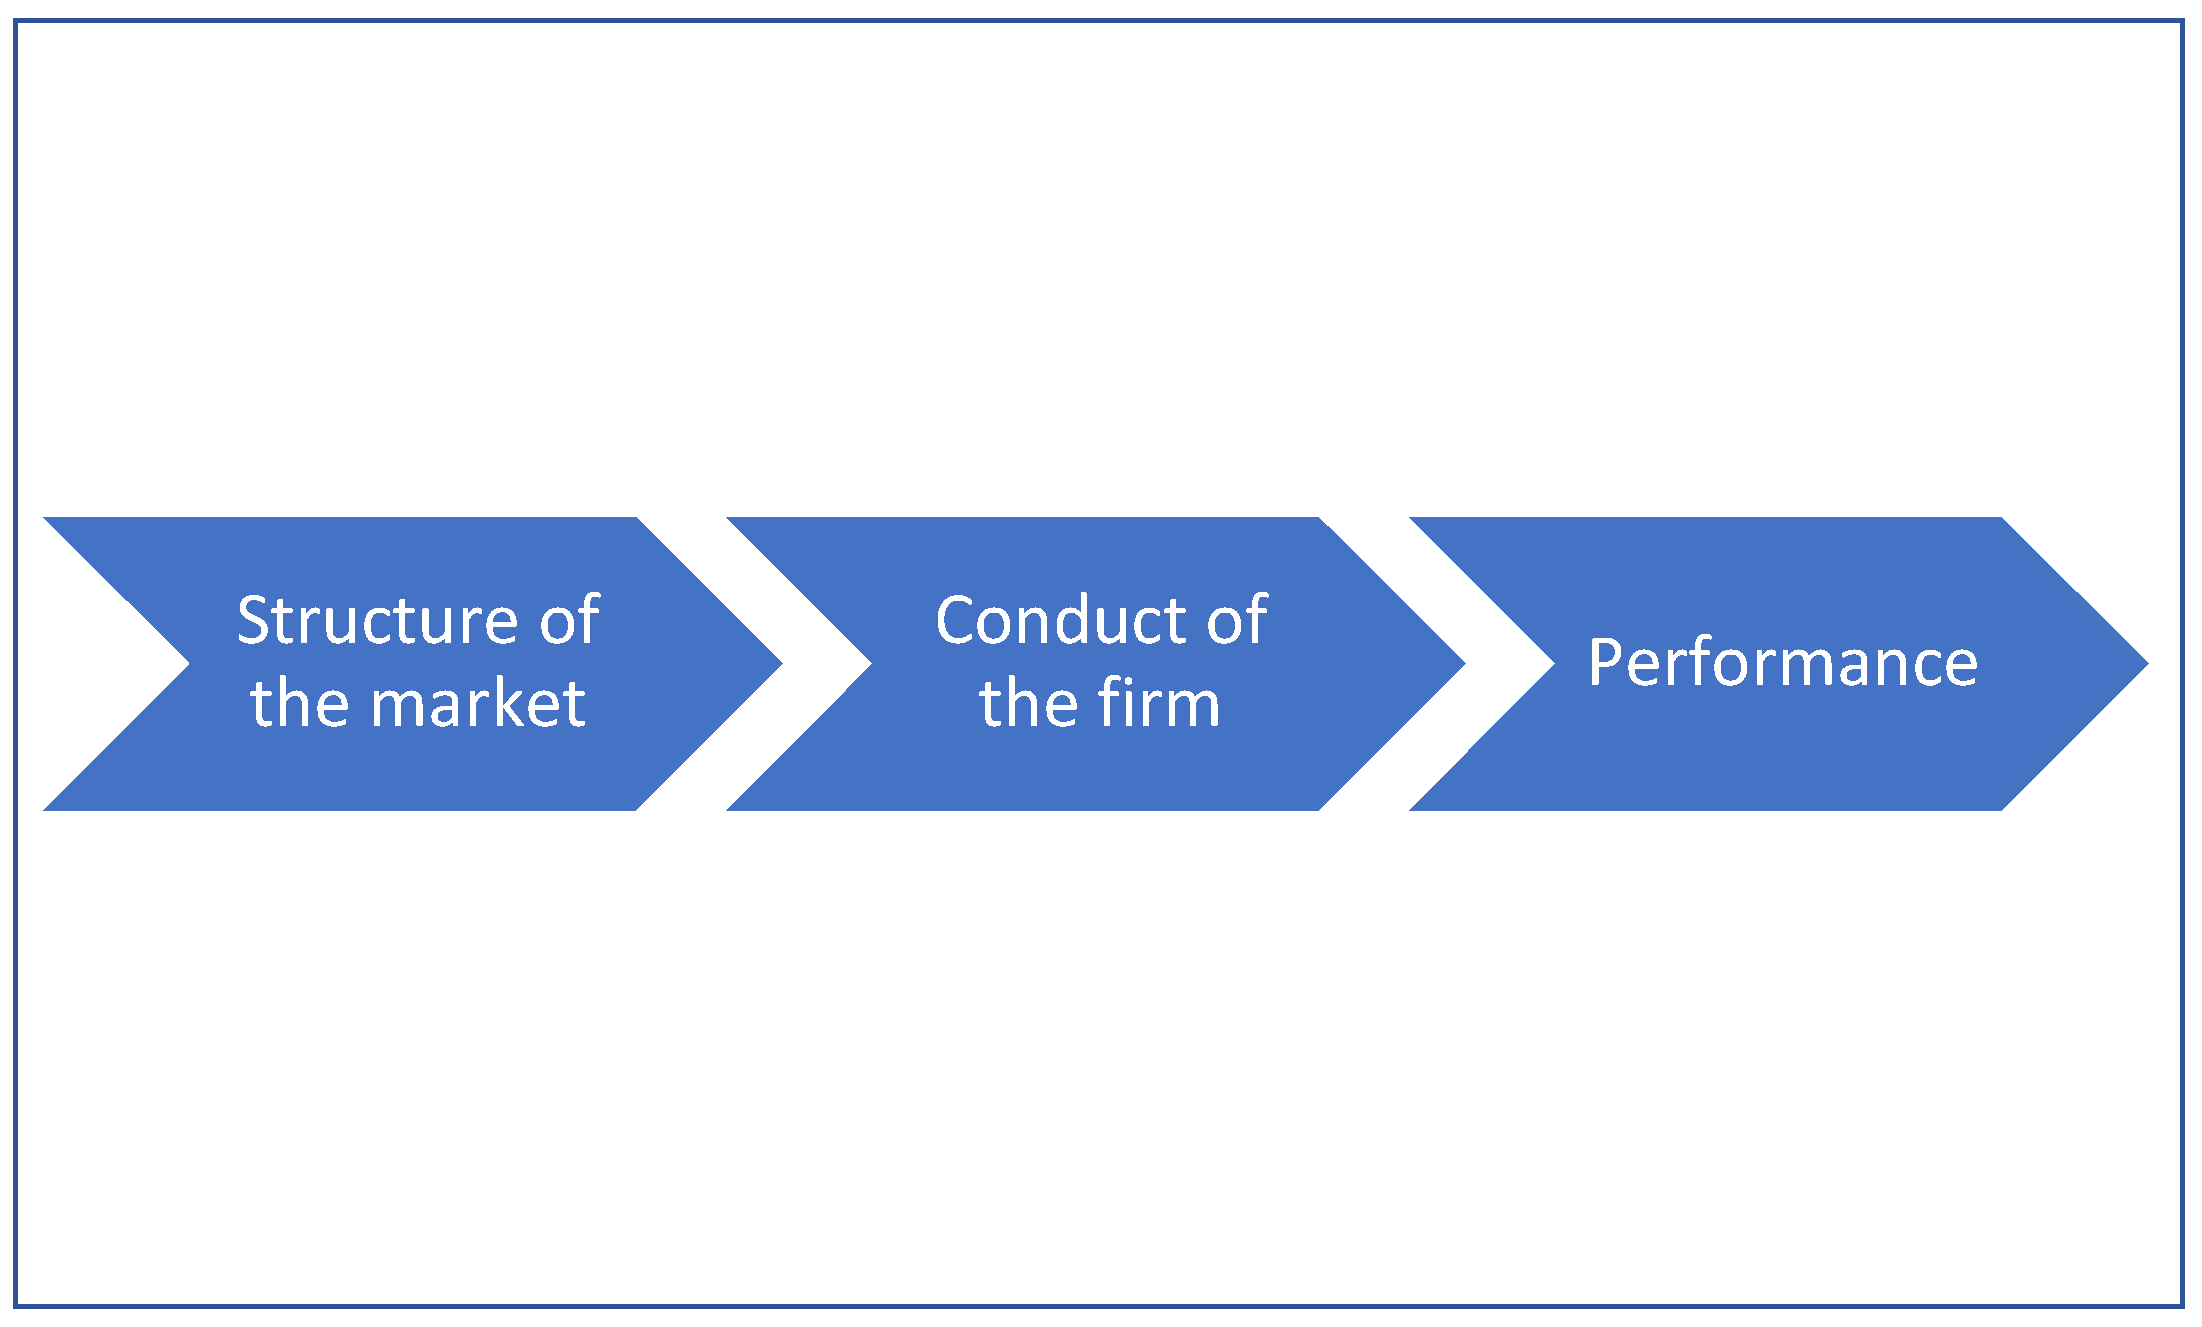 Flow diagram from structure of market to conduct of the firm to performance.